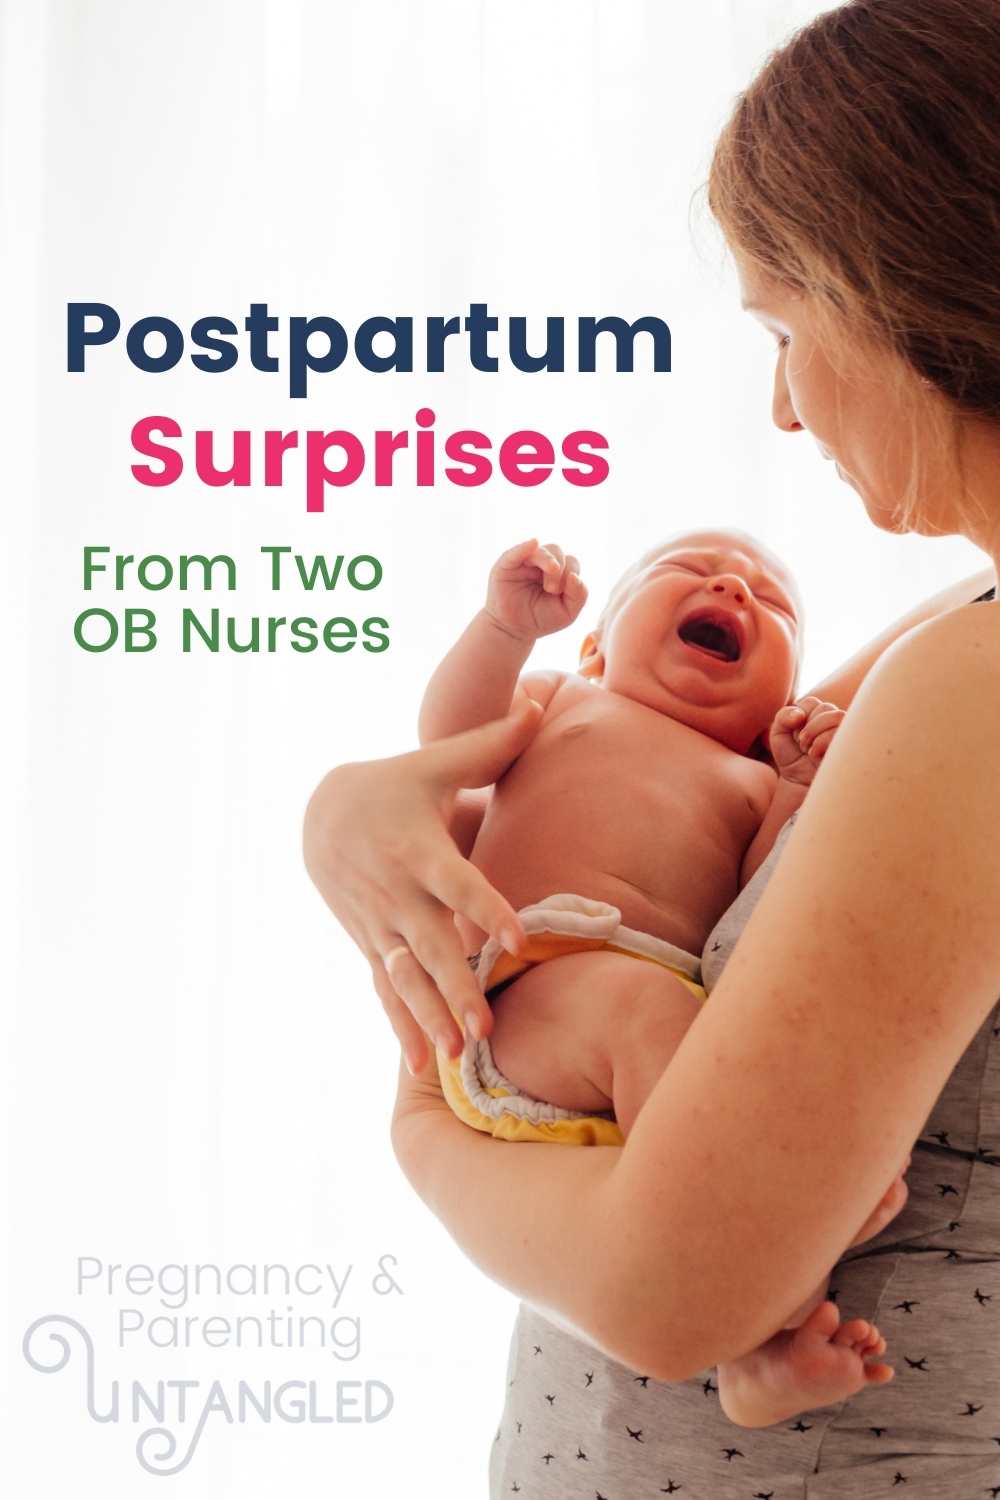 What things end up surprising people after baby is born. Today, two nurses are going to dive into the surprises you might see (and now, you won't be surprised by them!). via @pullingcurls